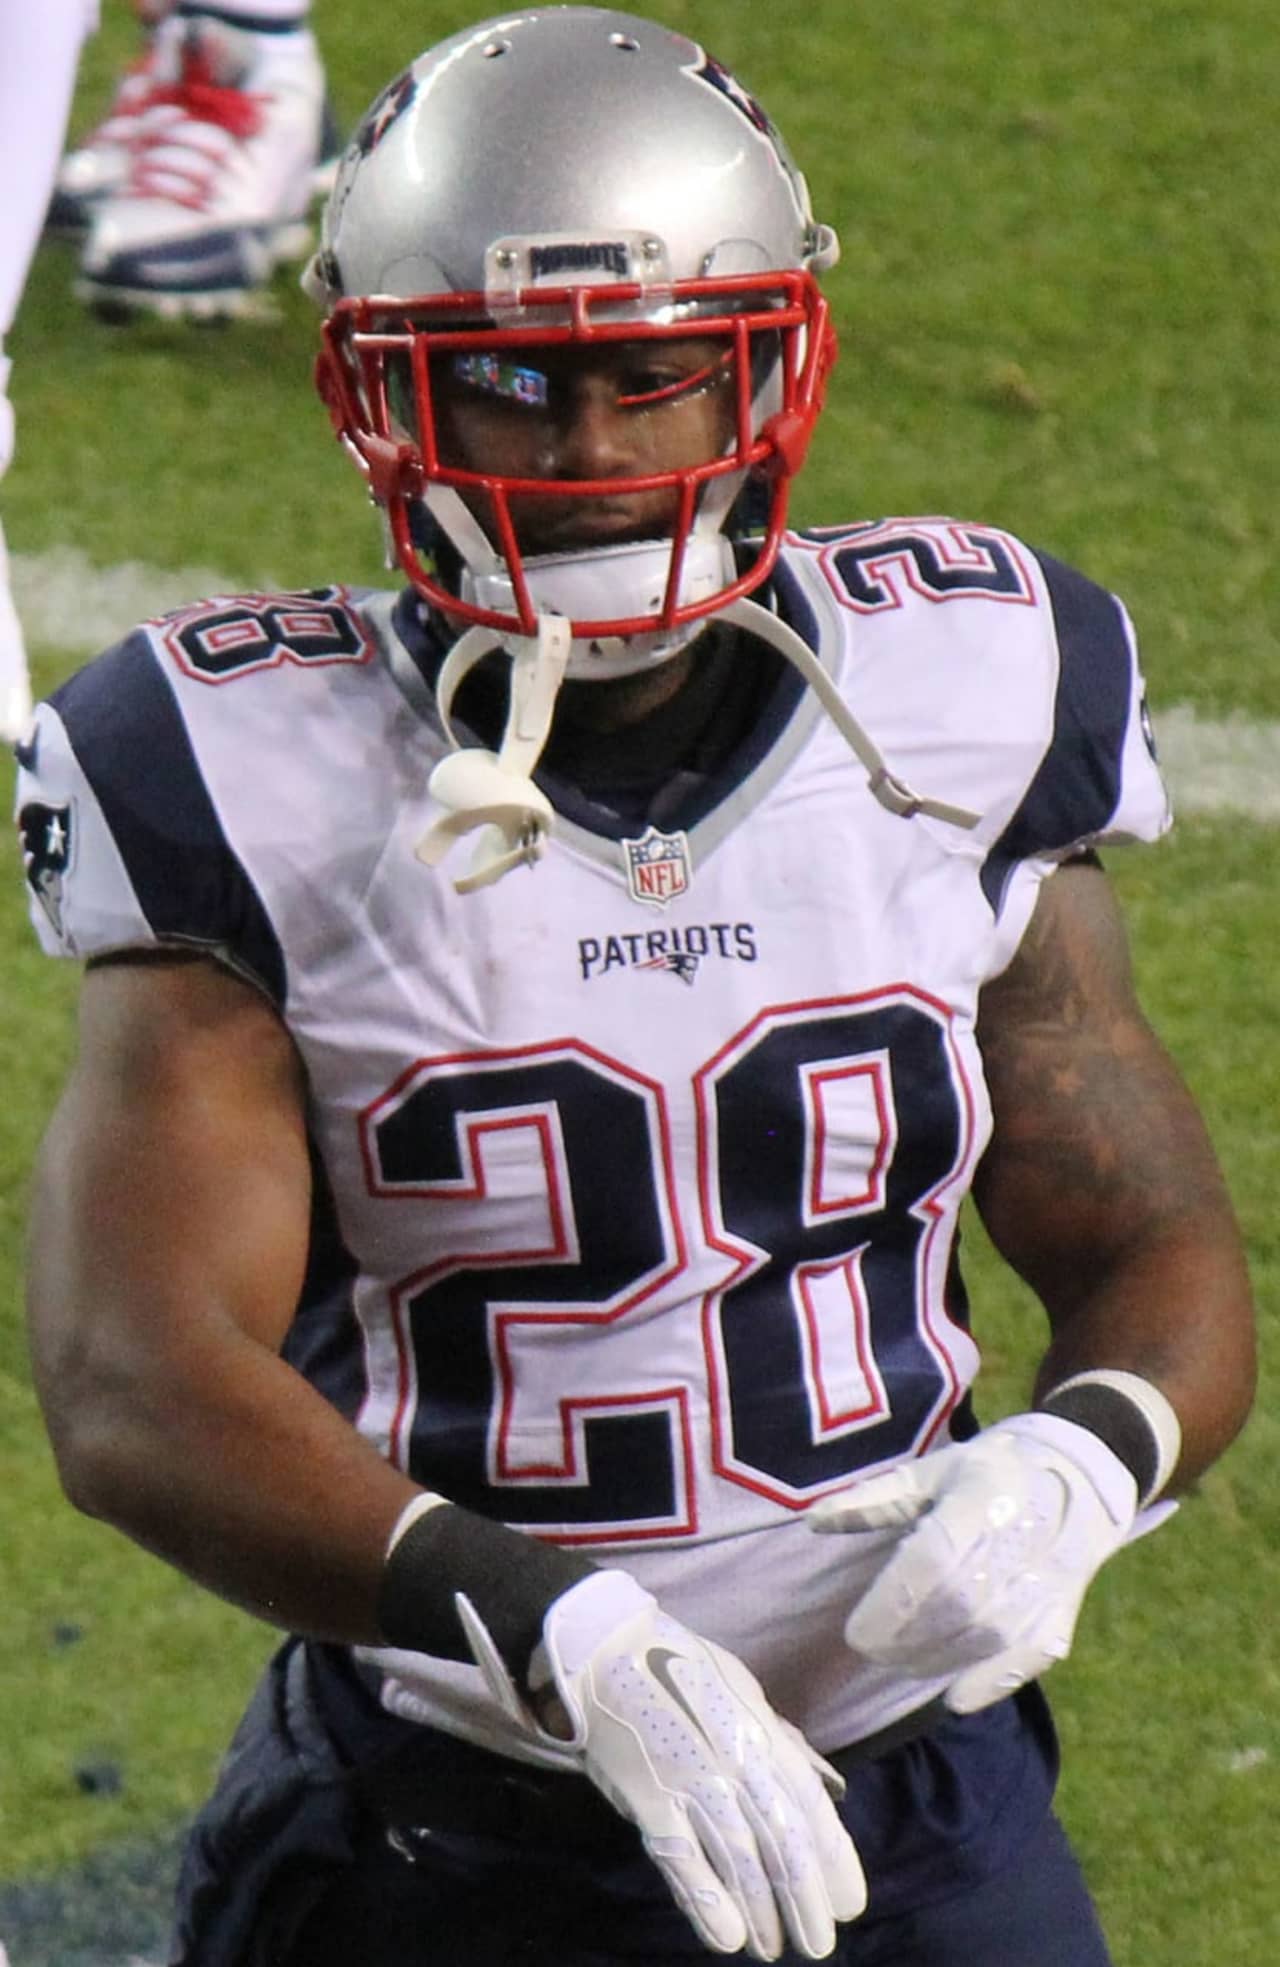 Patriots running back James White announced on Thursday, Aug. 11, that he would retire from the NFL.